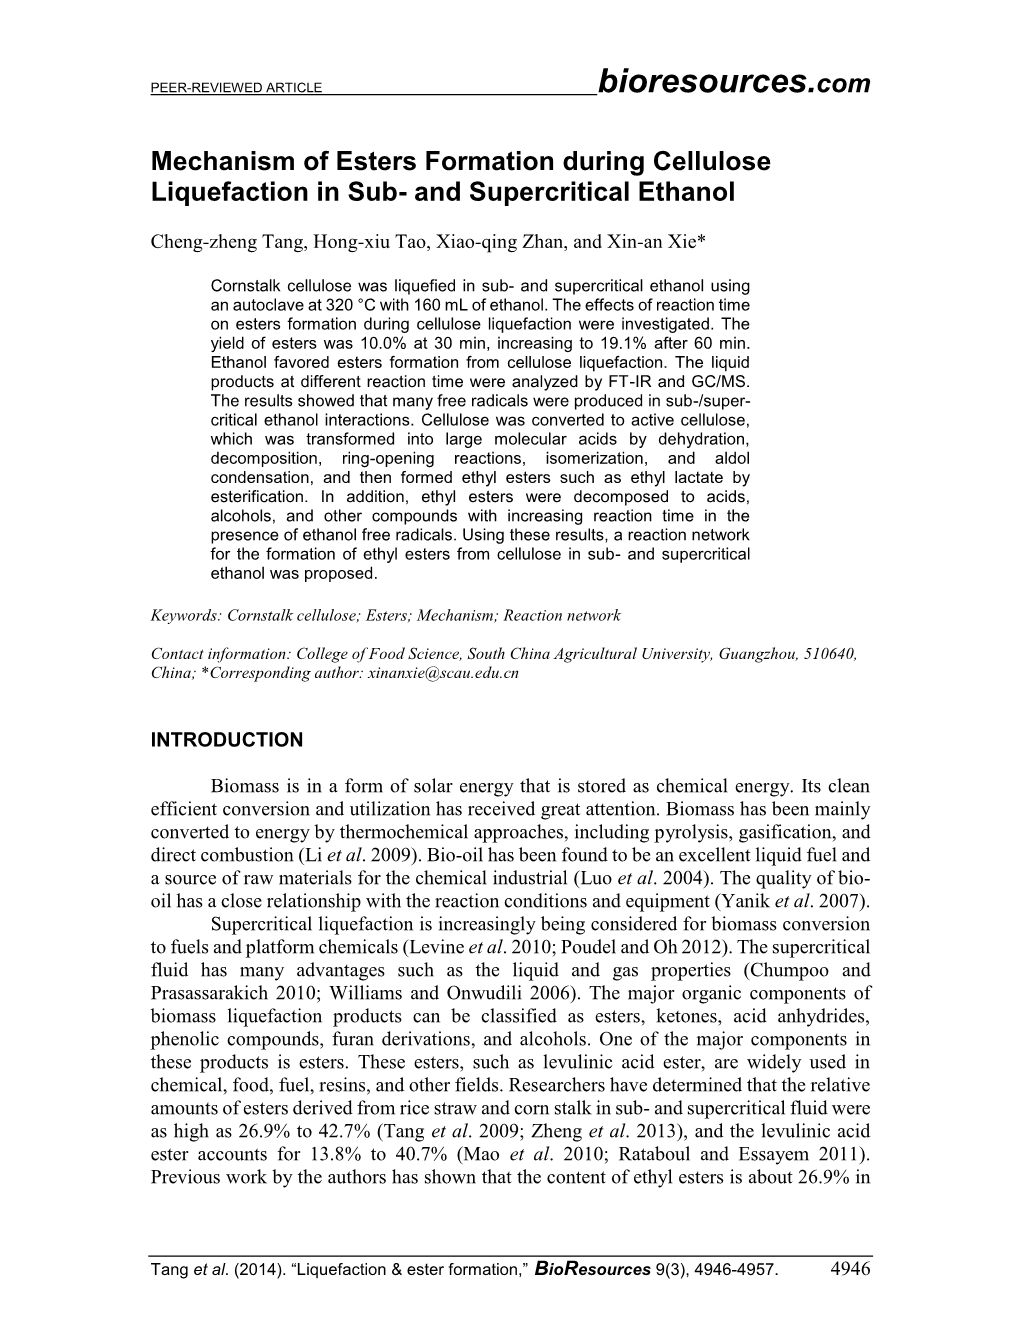 Mechanism of Esters Formation During Cellulose Liquefaction in Sub- and Supercritical Ethanol